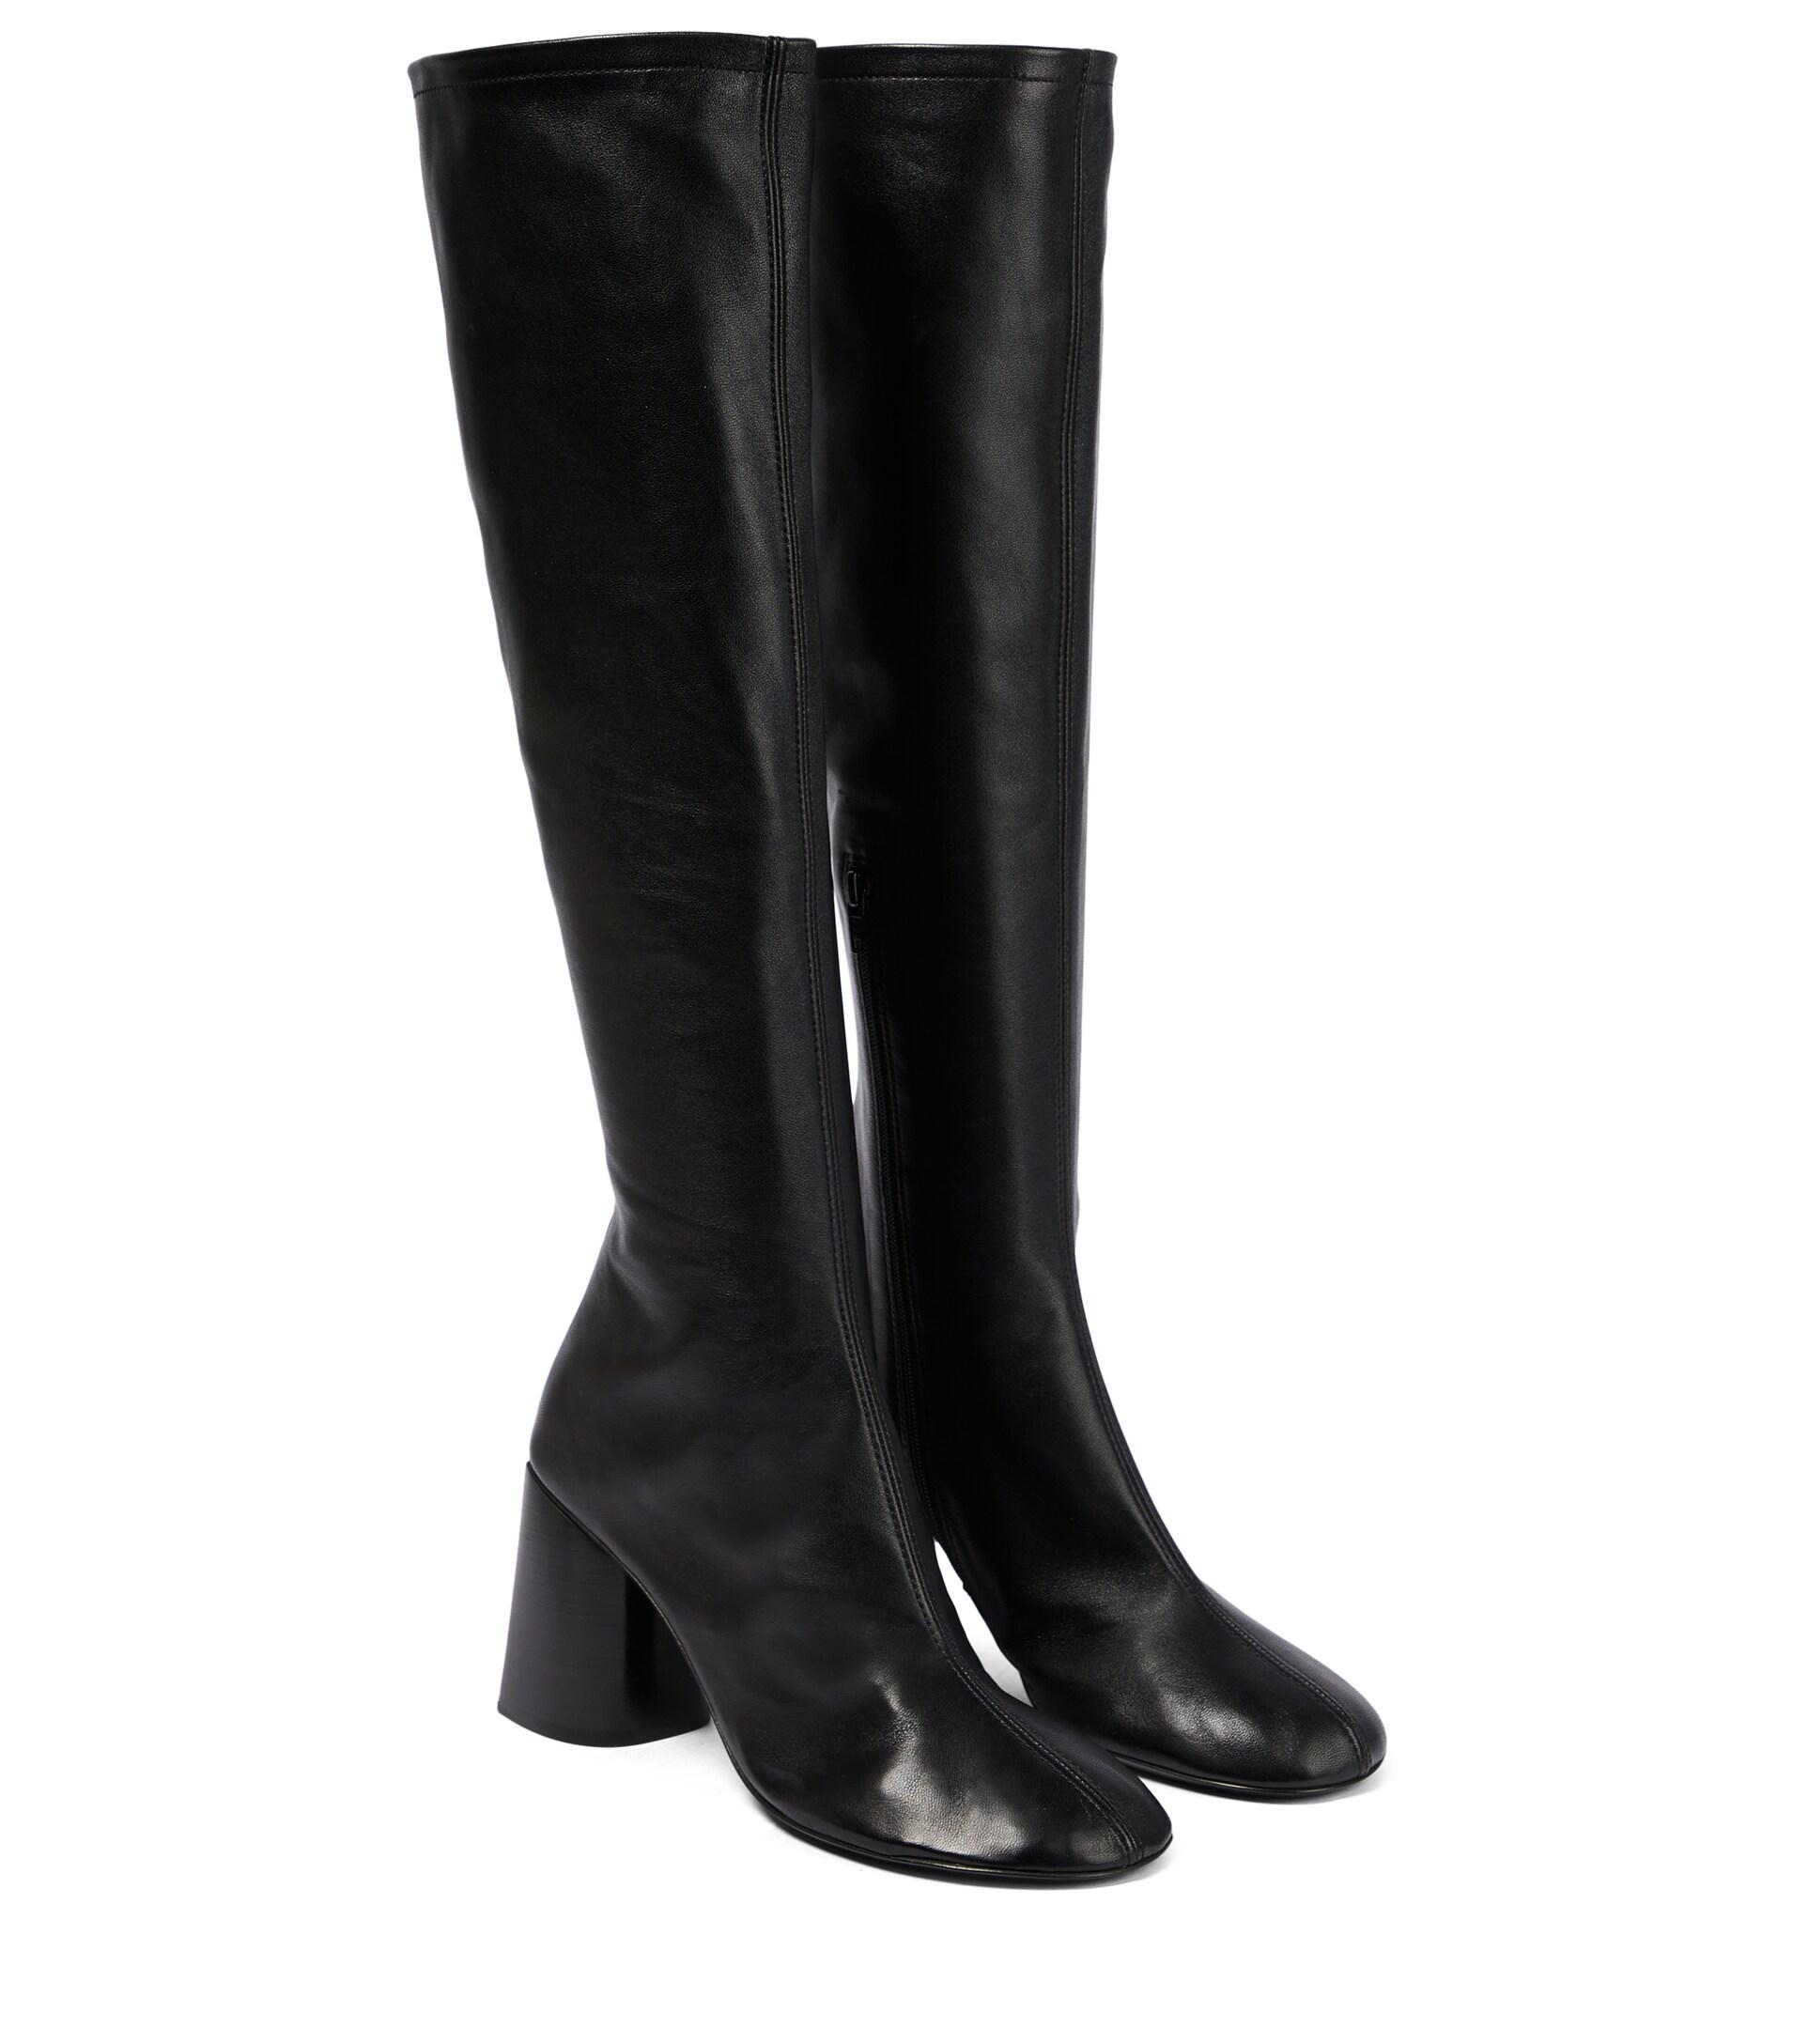 Balenciaga Glove Knee-high Leather Boots in Black | Lyst